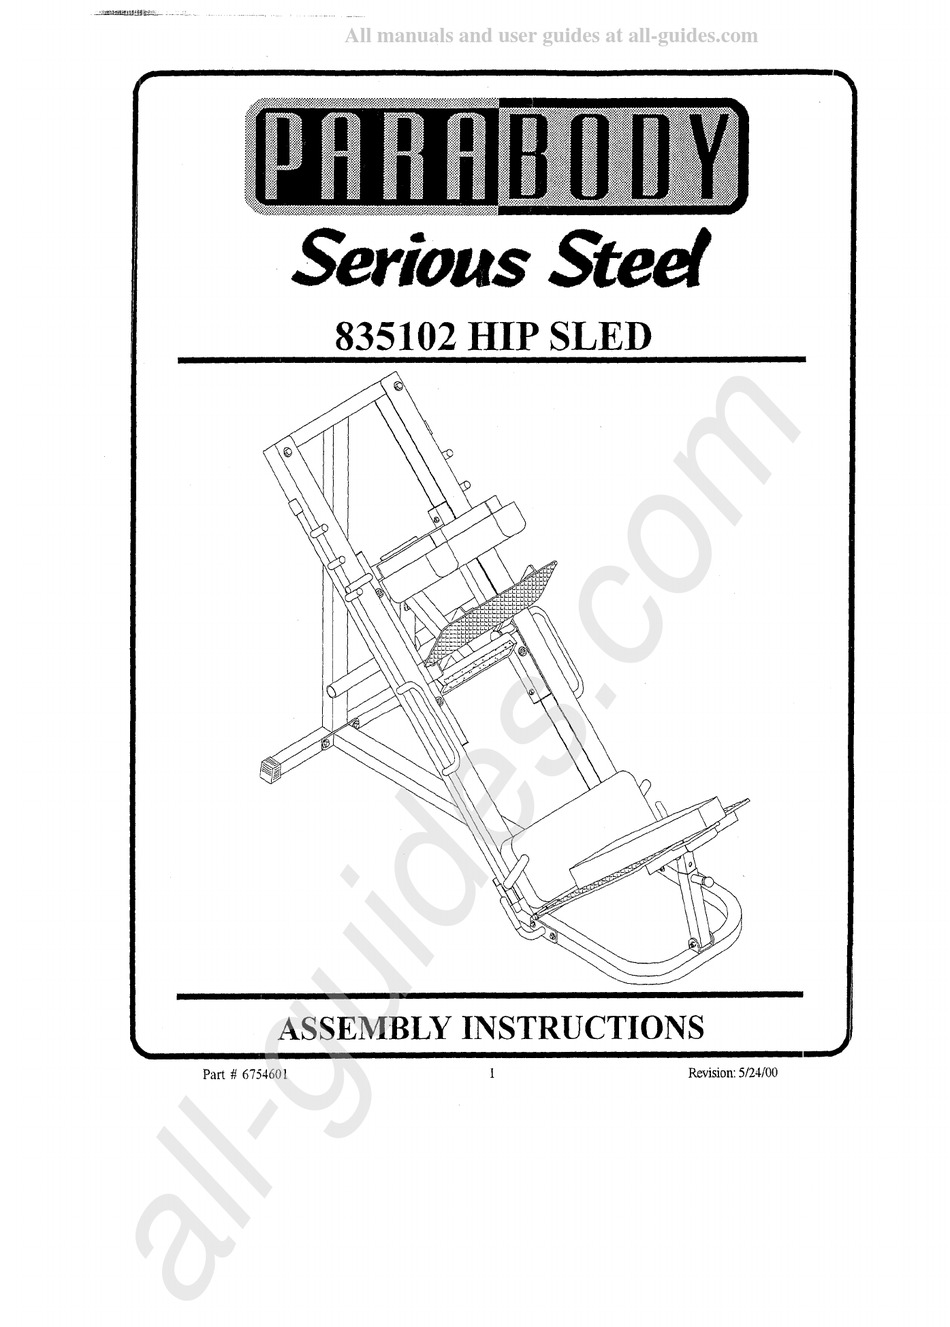 PARABODY SERIOUS STEEL 835102 ASSEMBLY INSTRUCTIONS MANUAL Pdf Download ...